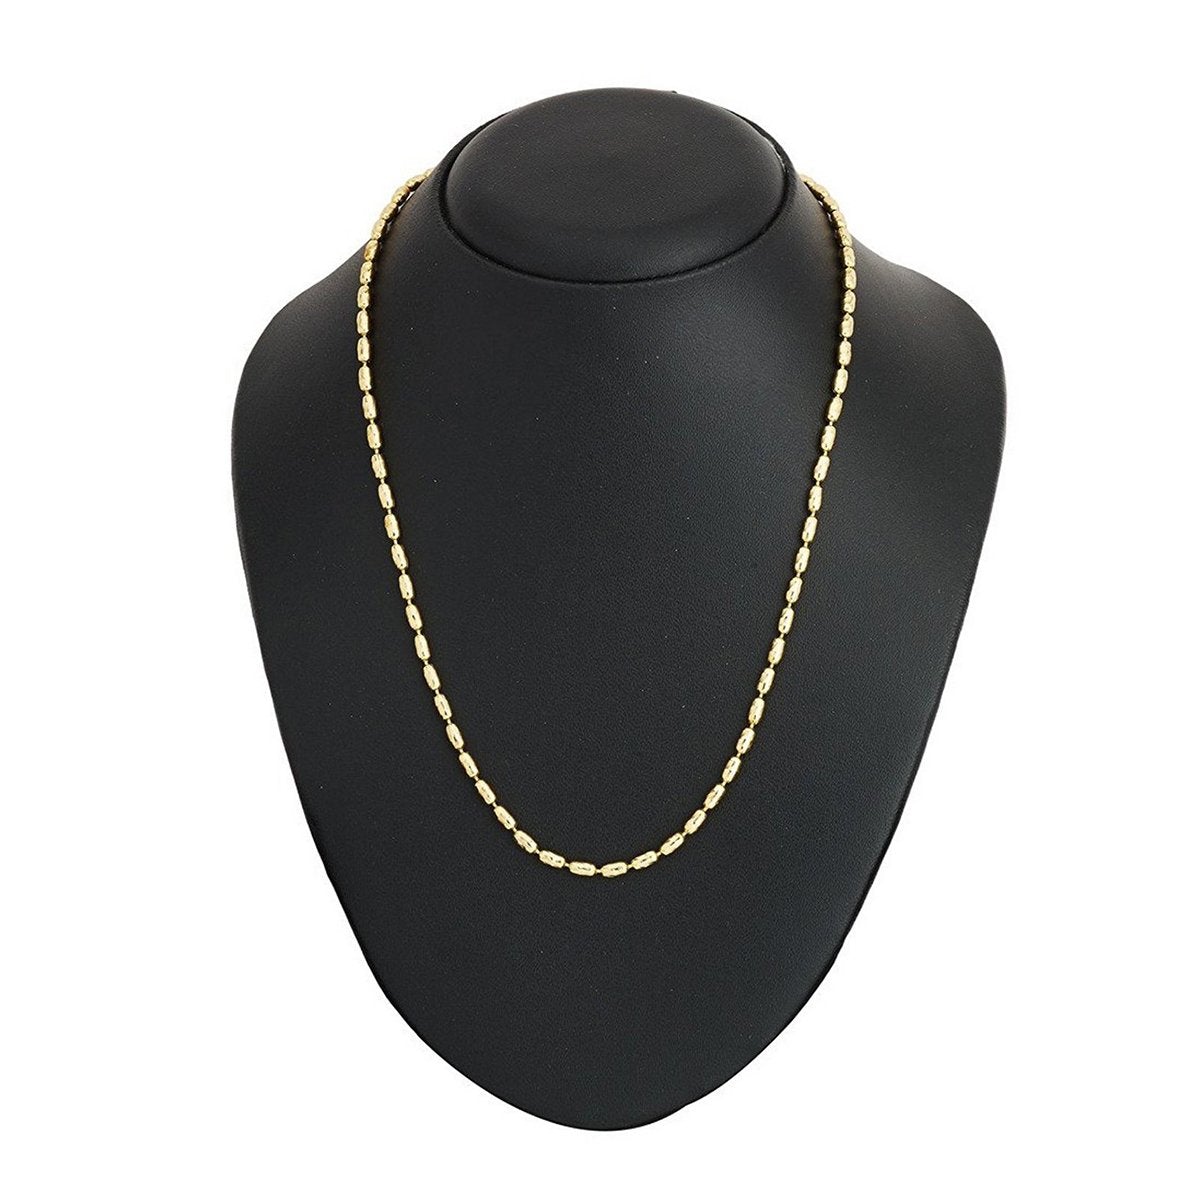 Oval Cylinder 22K Gold Plated 19" Chain For Men Women